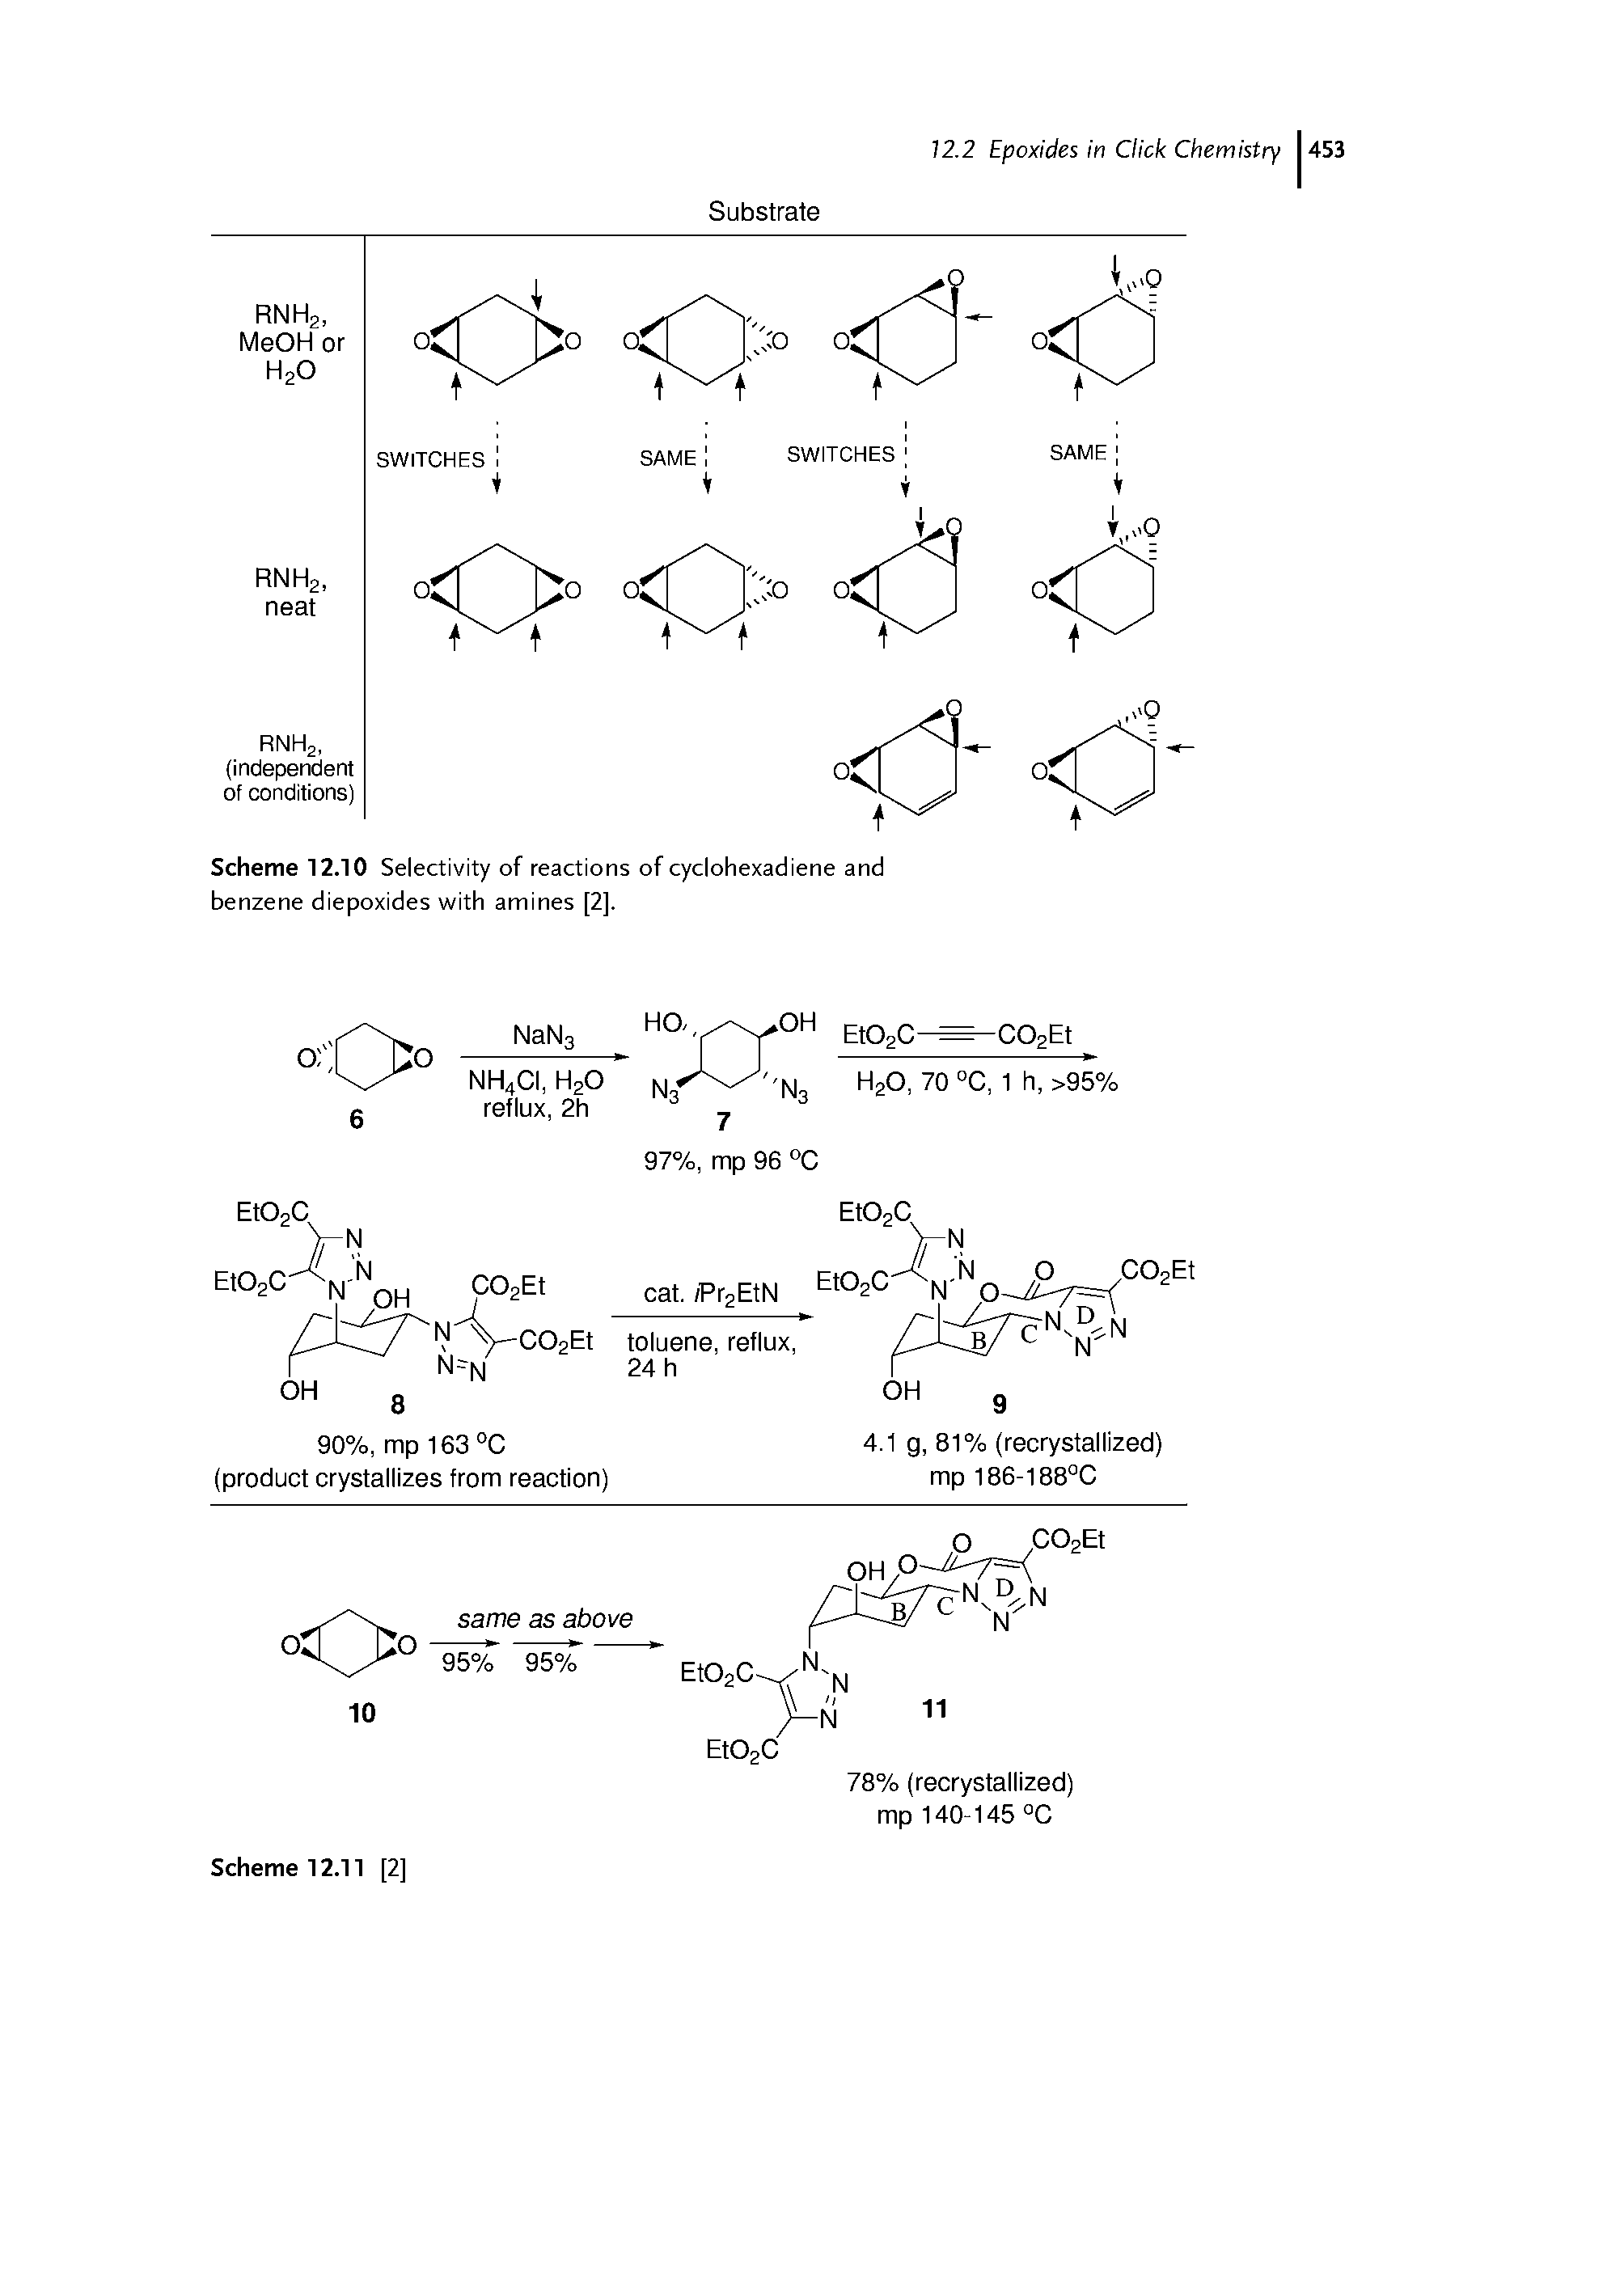 Scheme 12.10 Selectivity of reactions of cyclohexadiene and benzene diepoxides with amines [2].